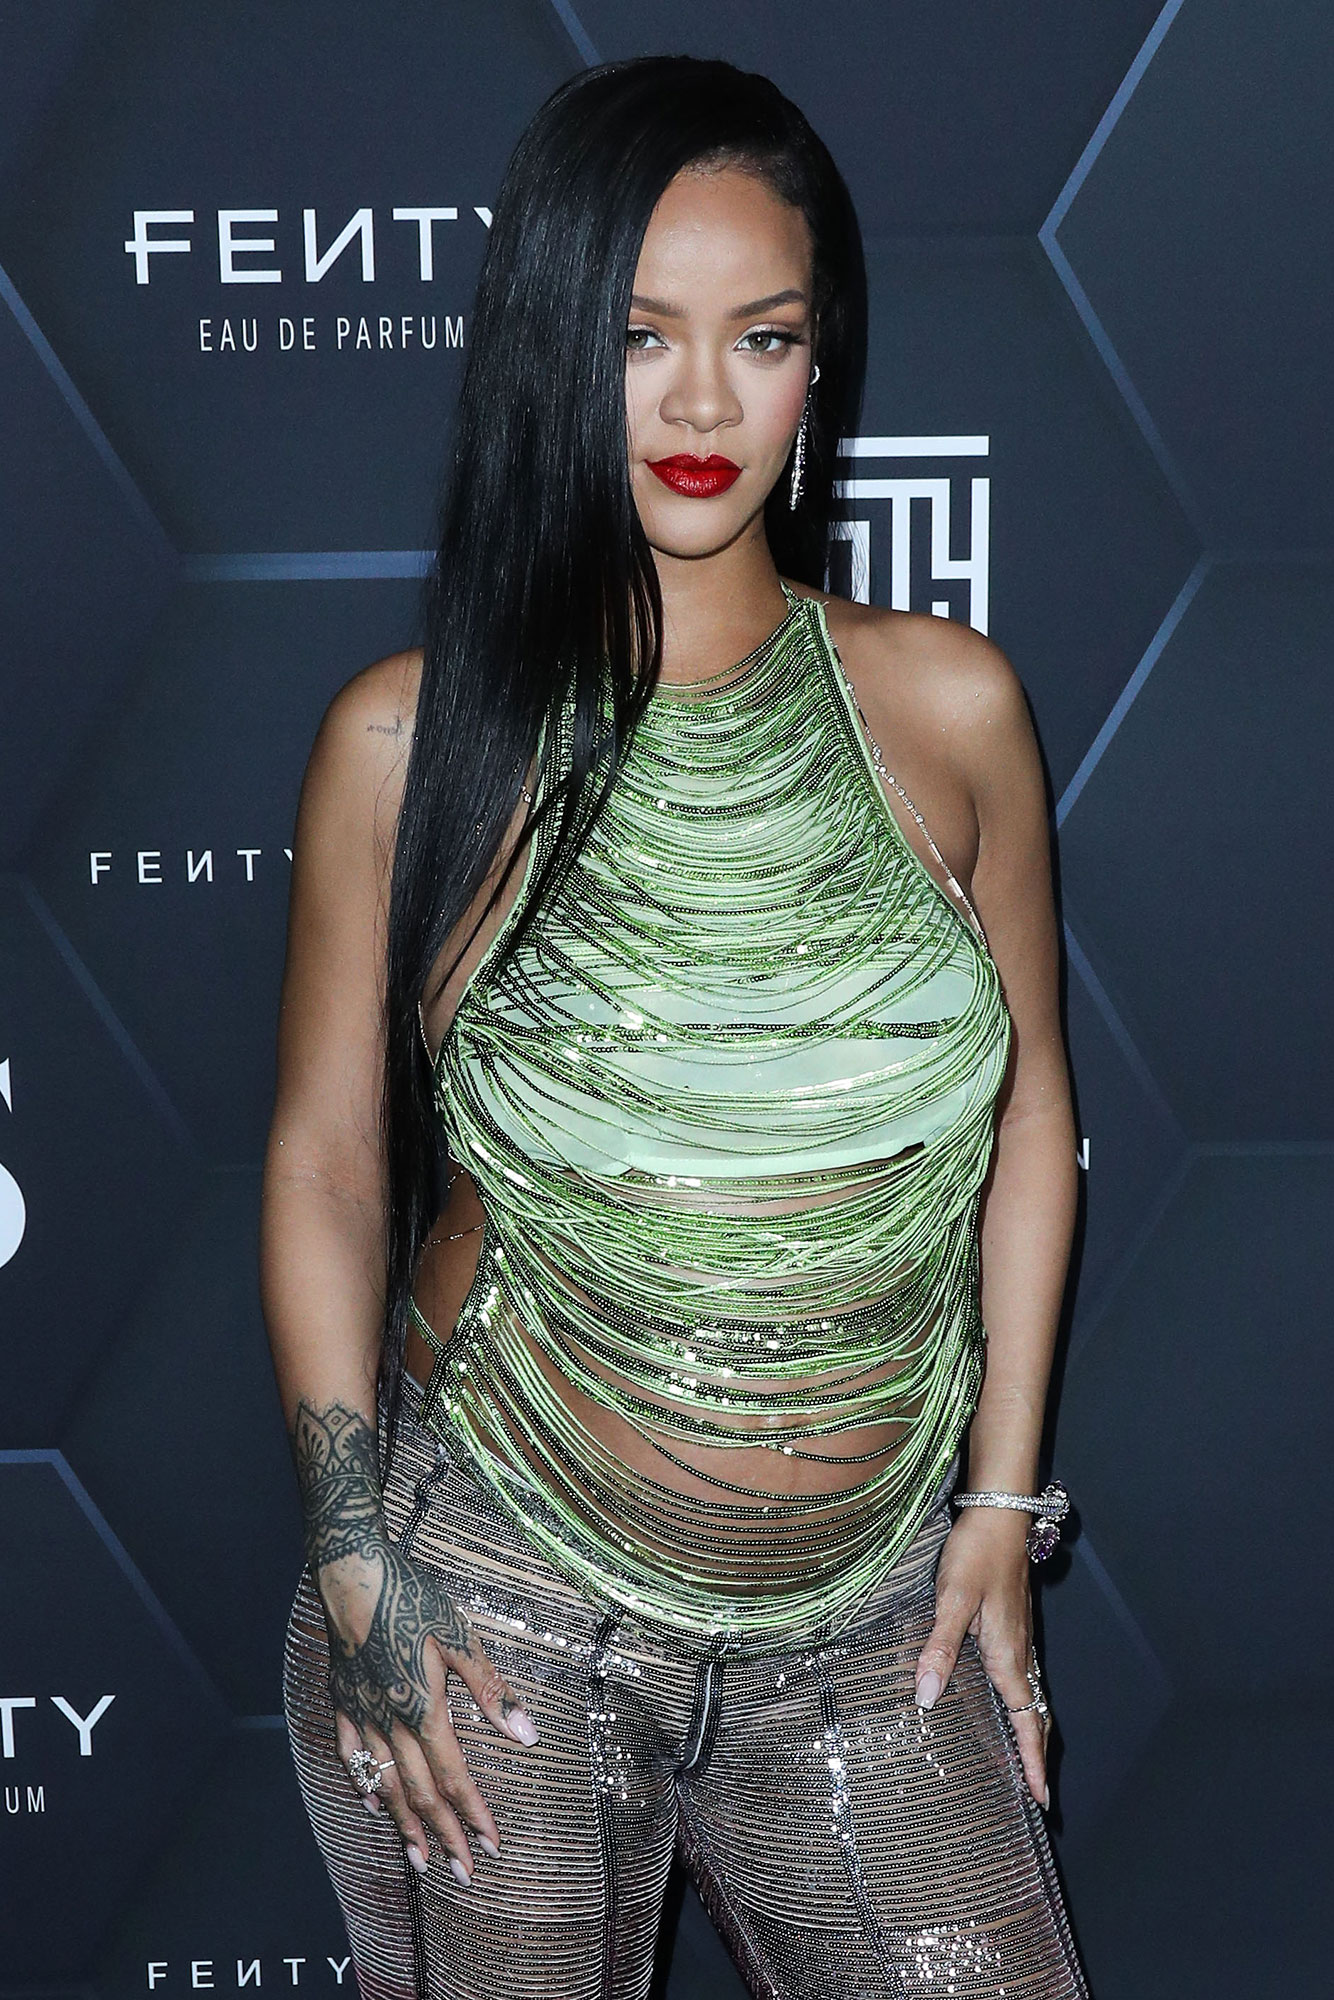 So What Does Rihanna's First Fenty Collection Actually Look Like